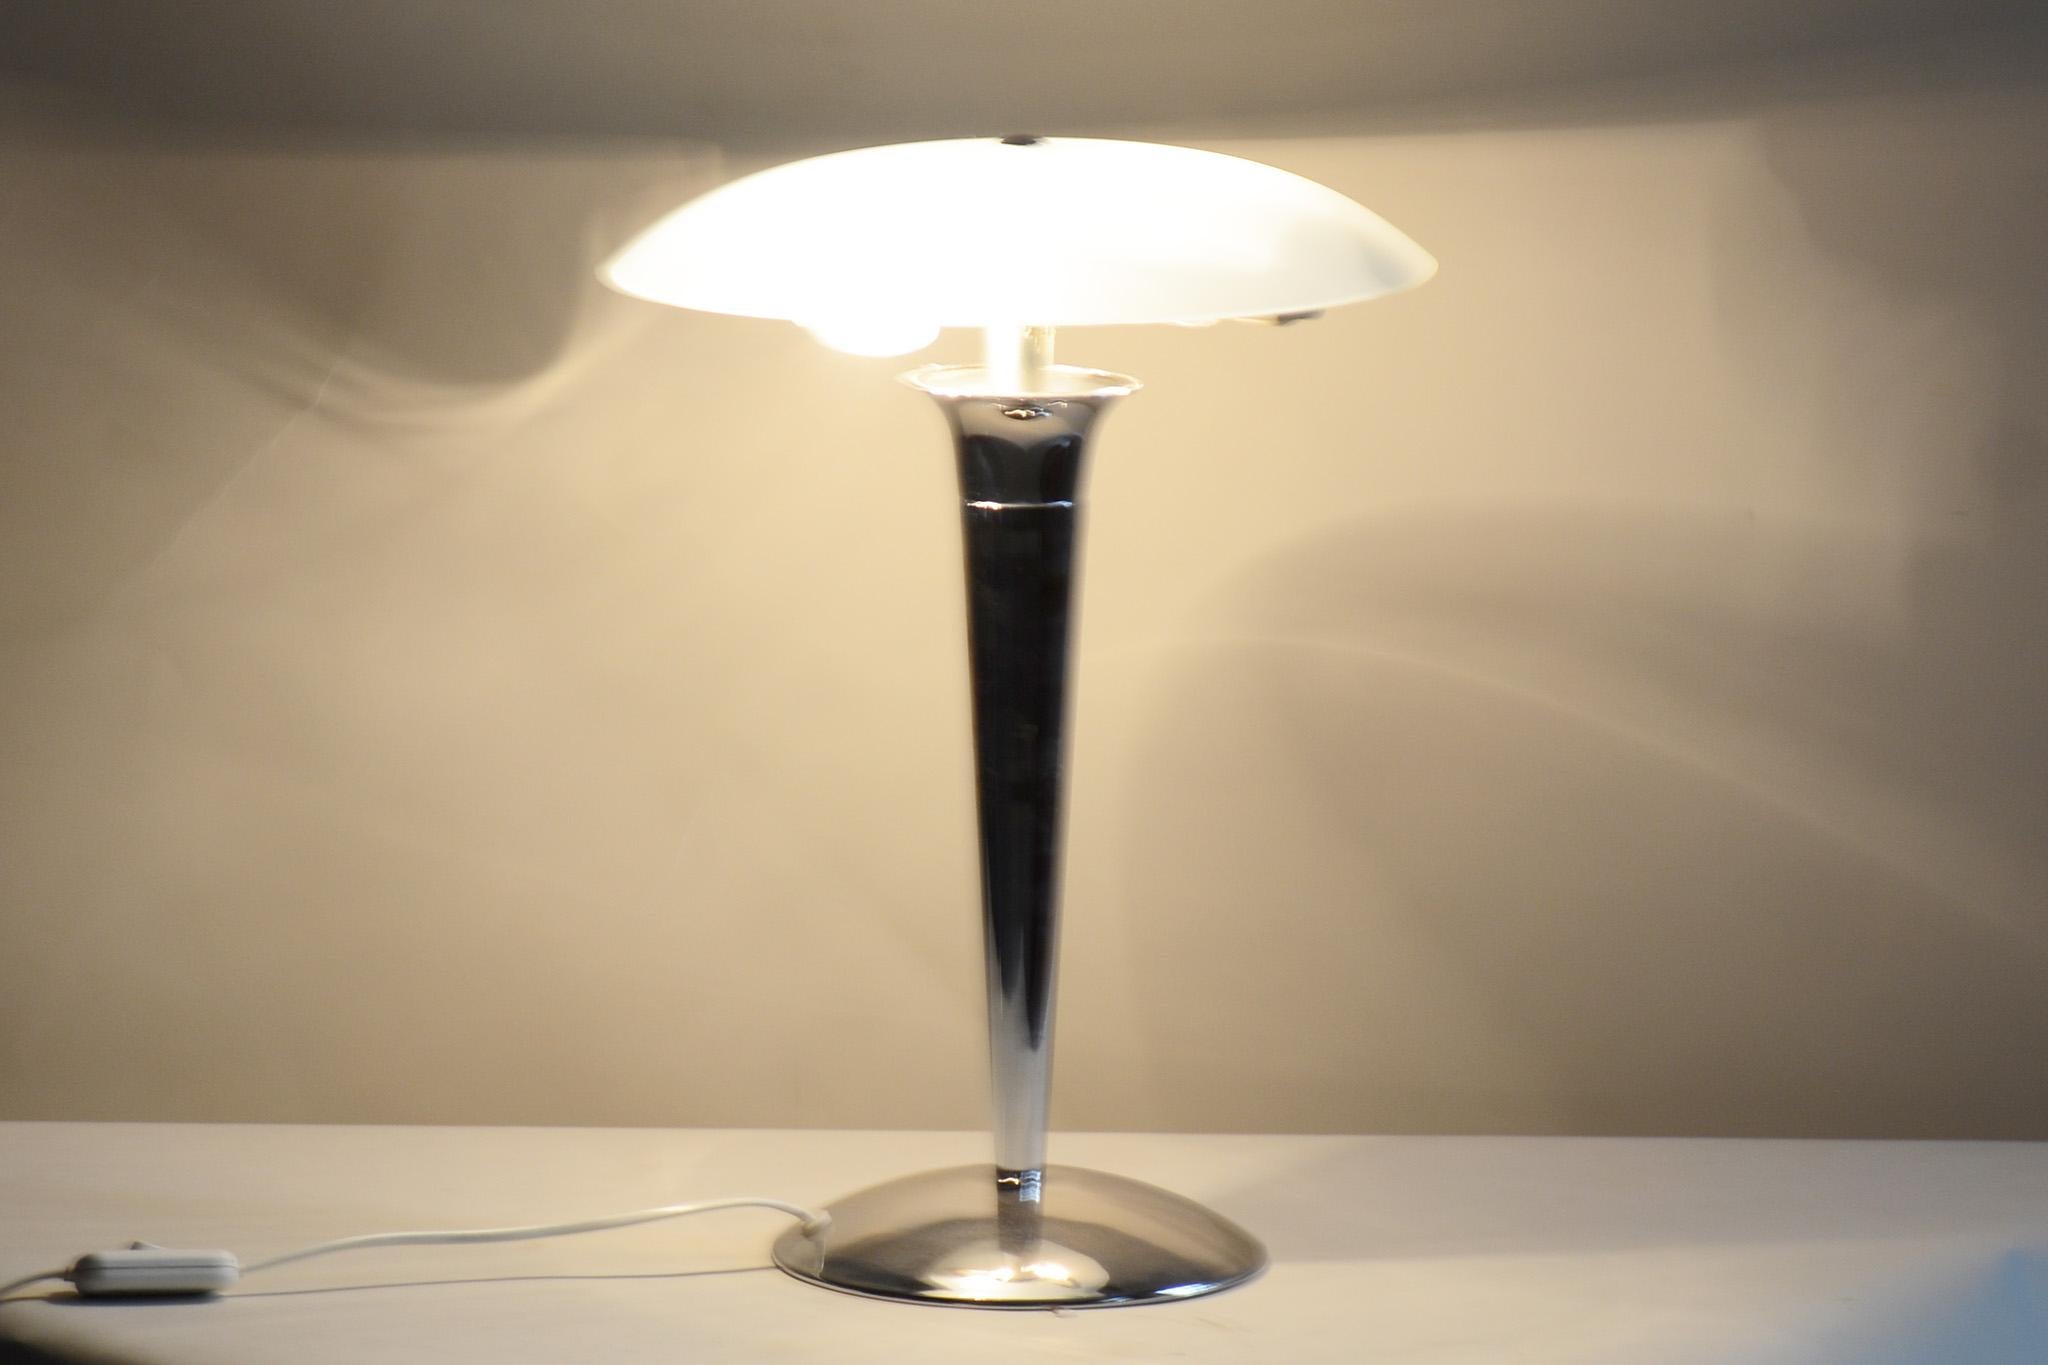 Mid-Century Modern Pair of Midcentury Table Lamps, Chrome-Plated Steel, Milk Glass, Germany, 1950s For Sale